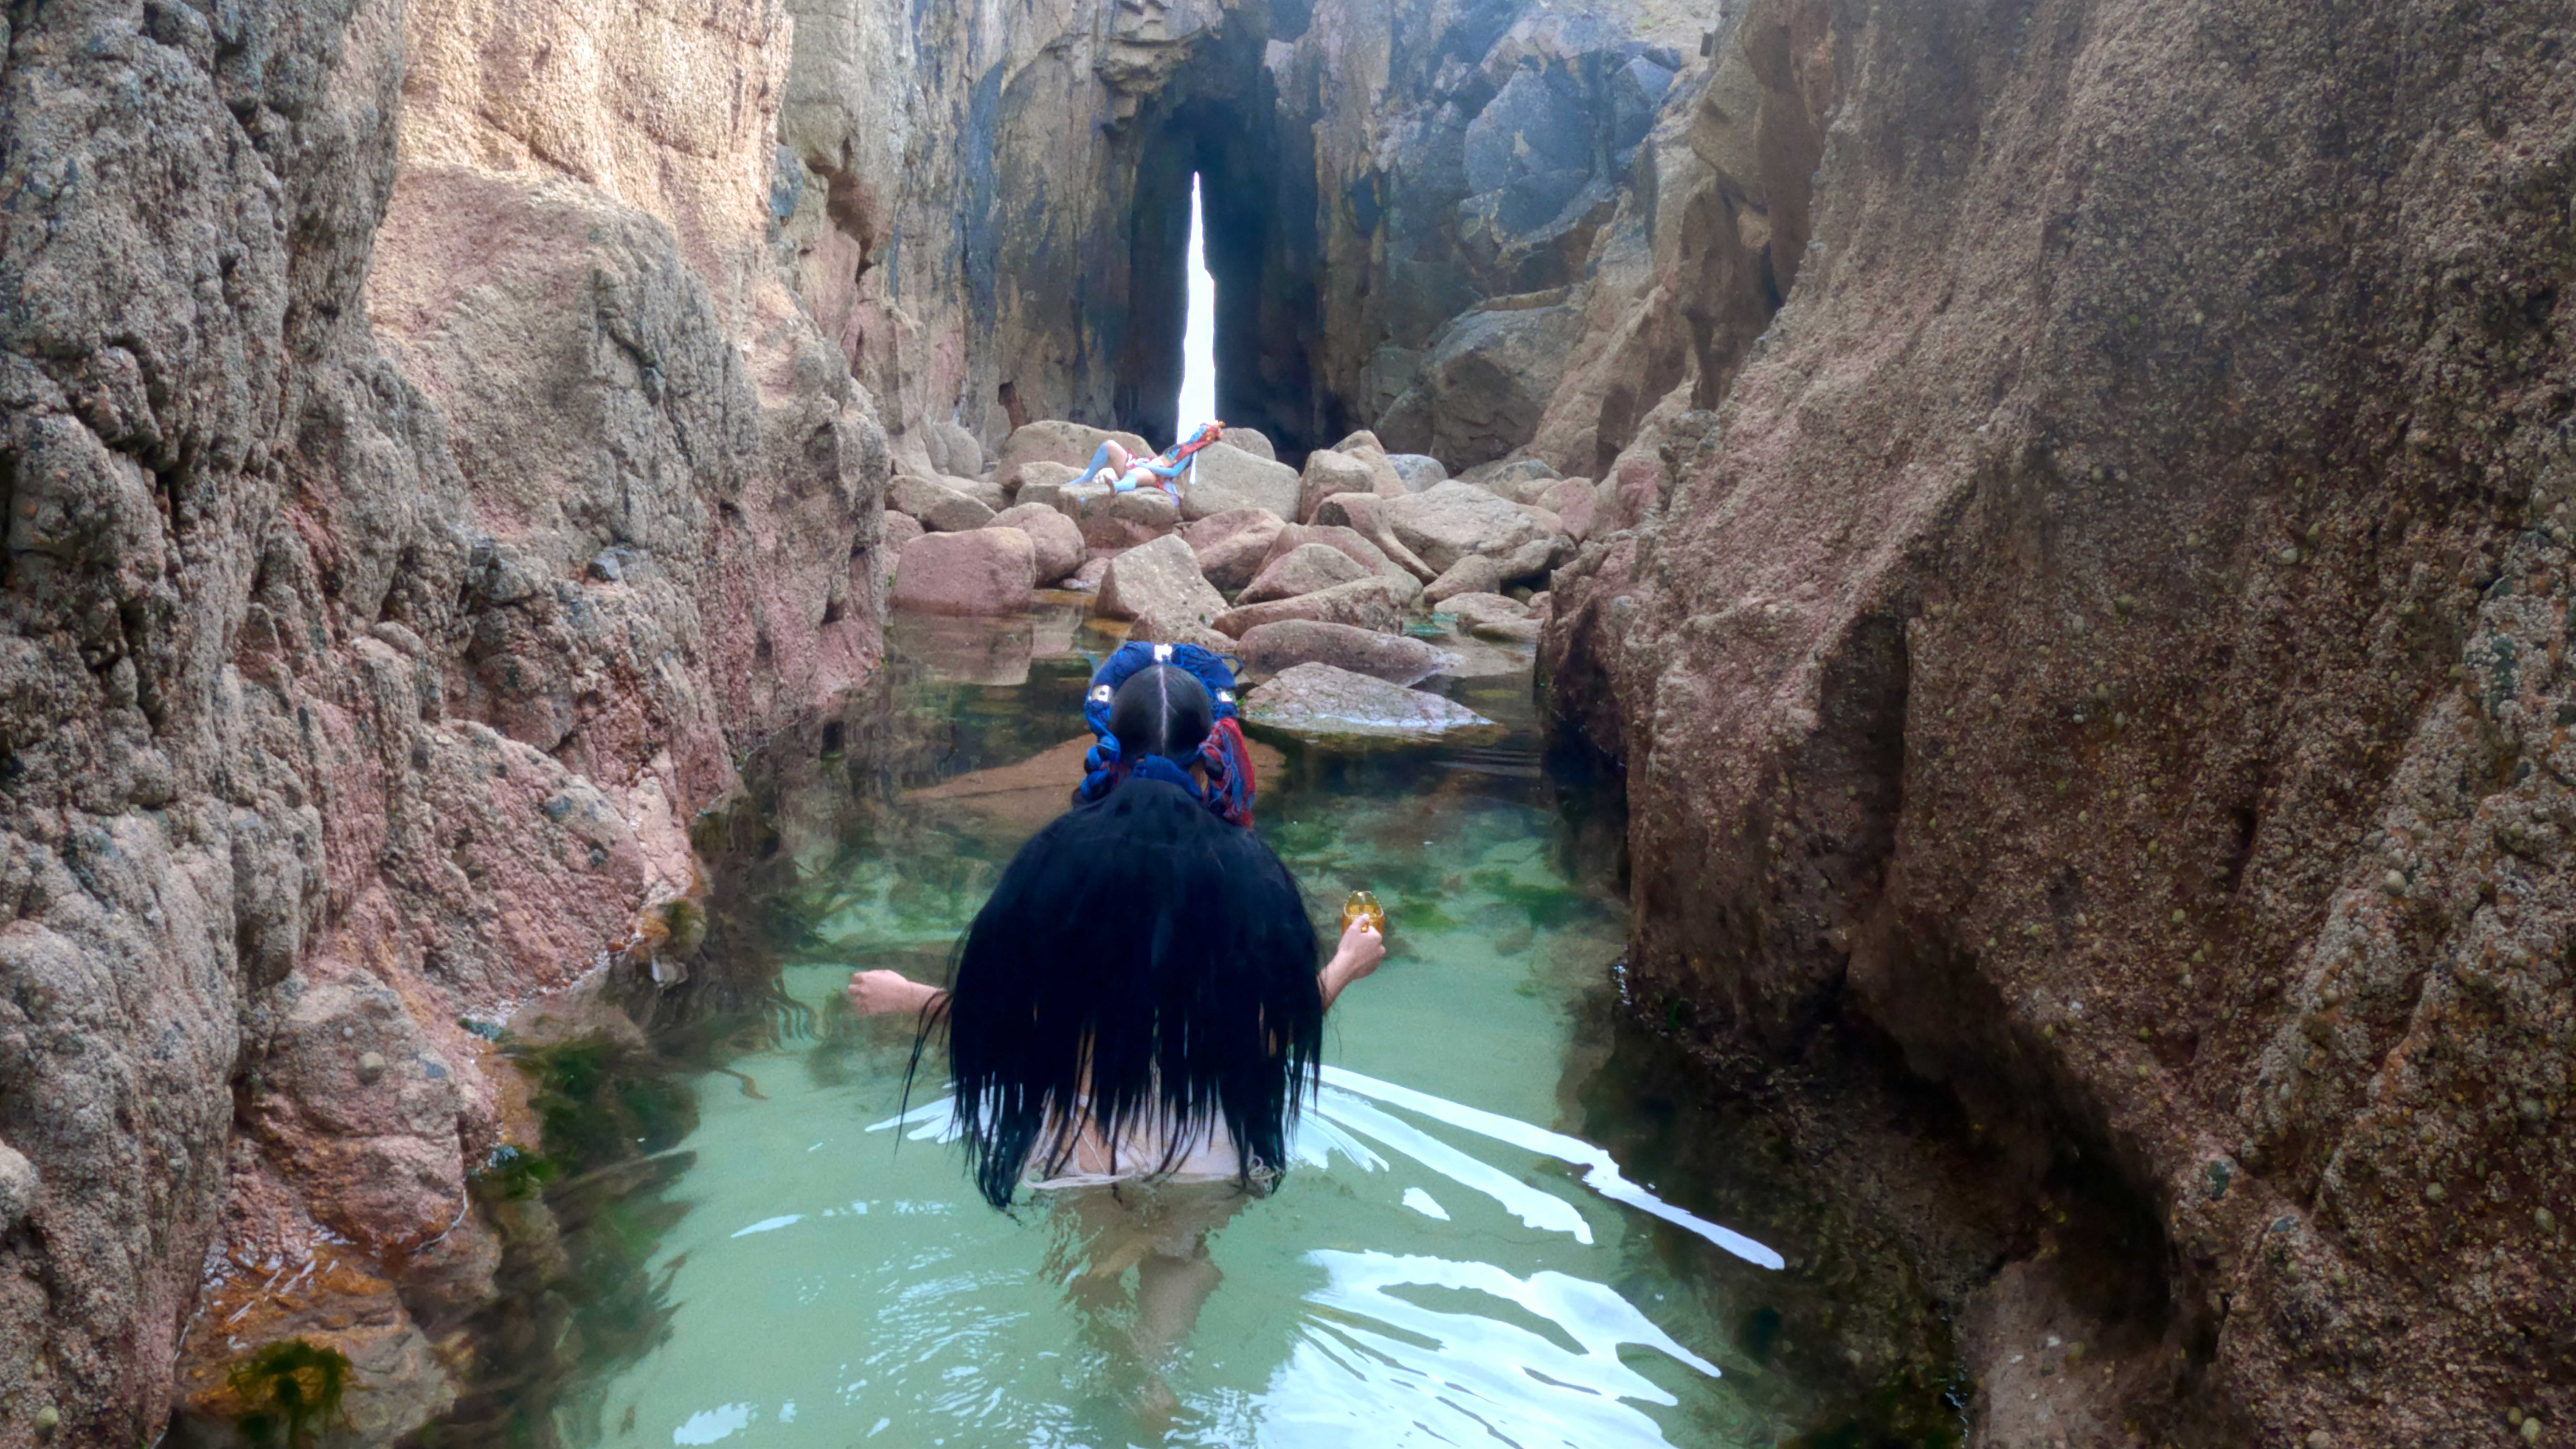 A person with long black hair wades through a clear water in between two large rocks